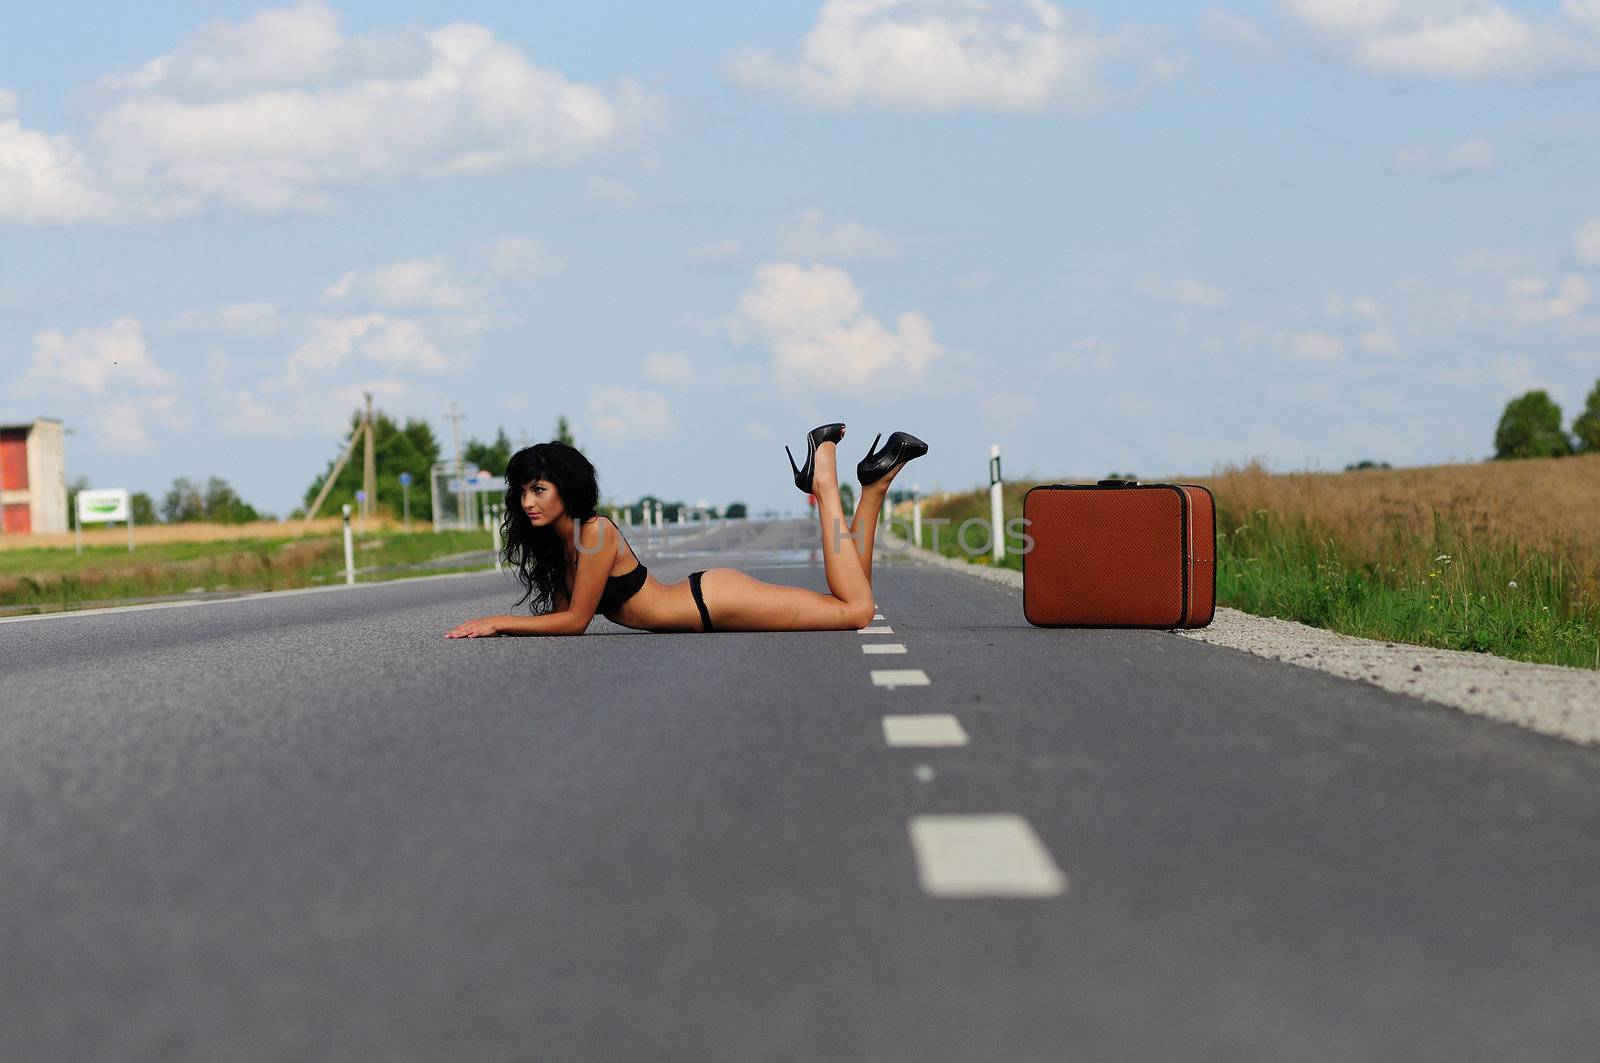 Sexy Traffic Stopper. Gorgeous sexy lady in bikini and stiletto shoes lying across the empty road attempting to block traffic.